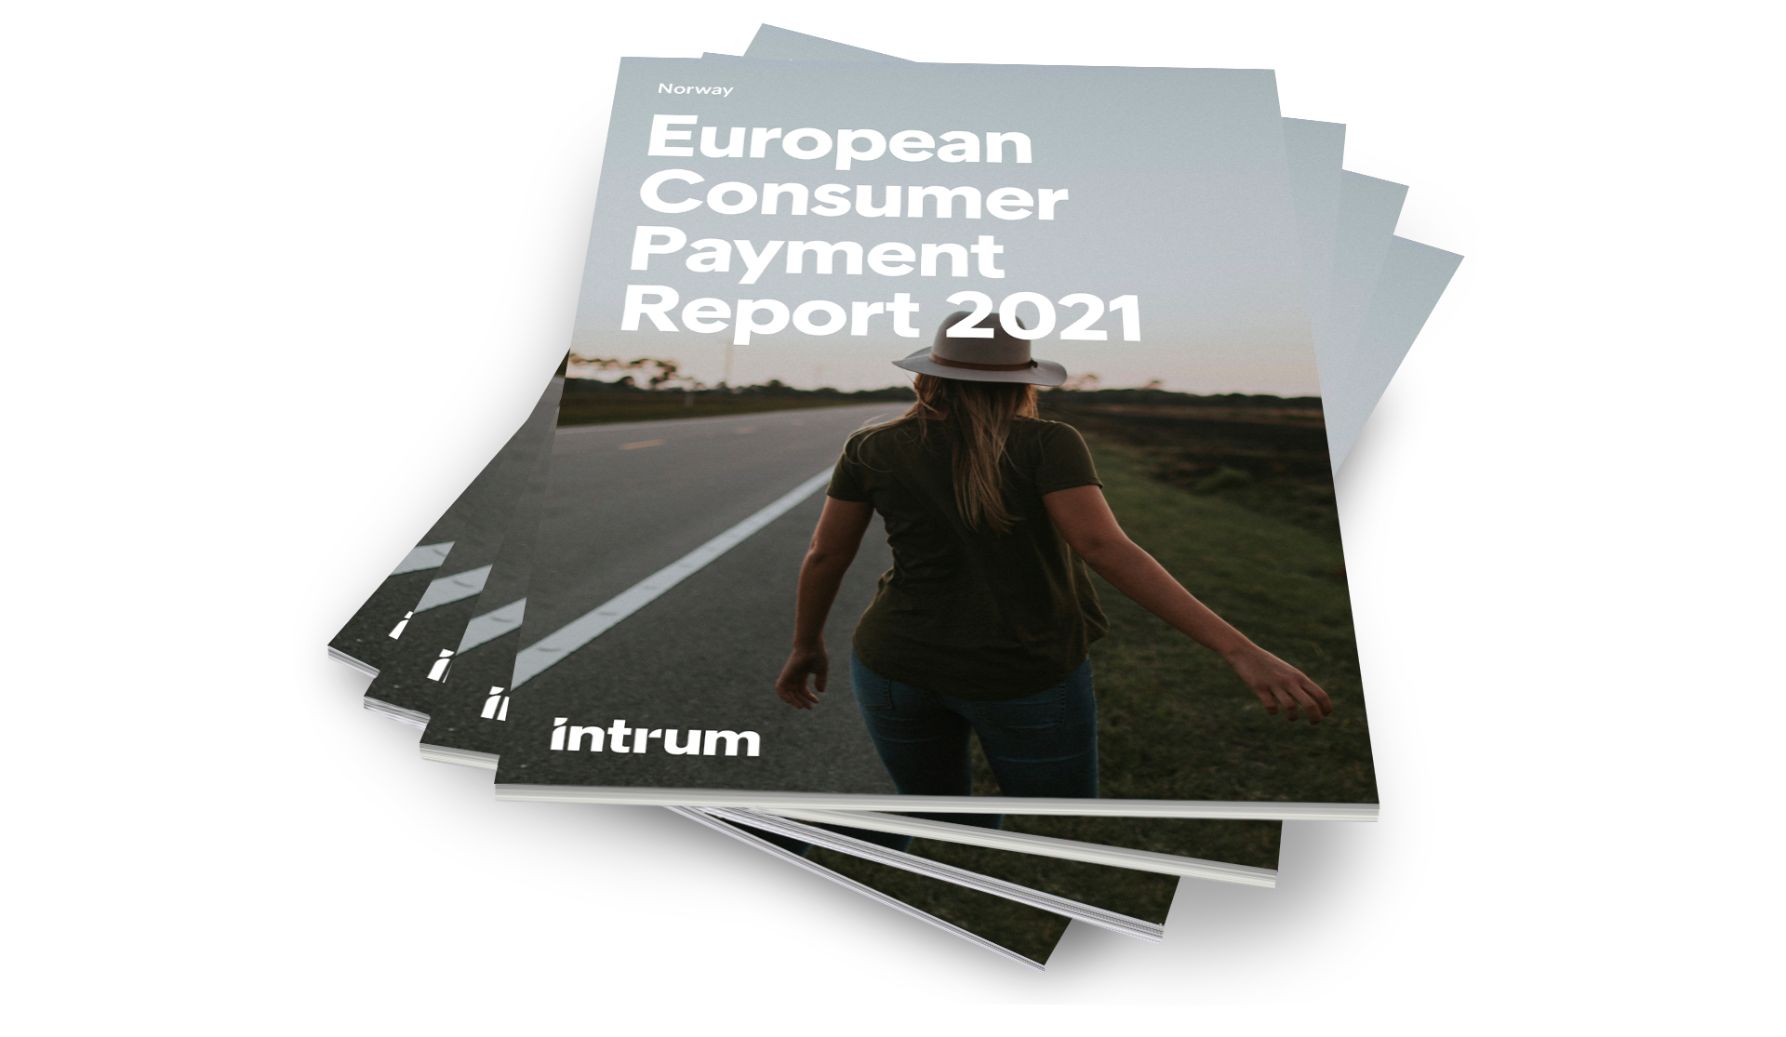 The European Consumer Payment Report 2021